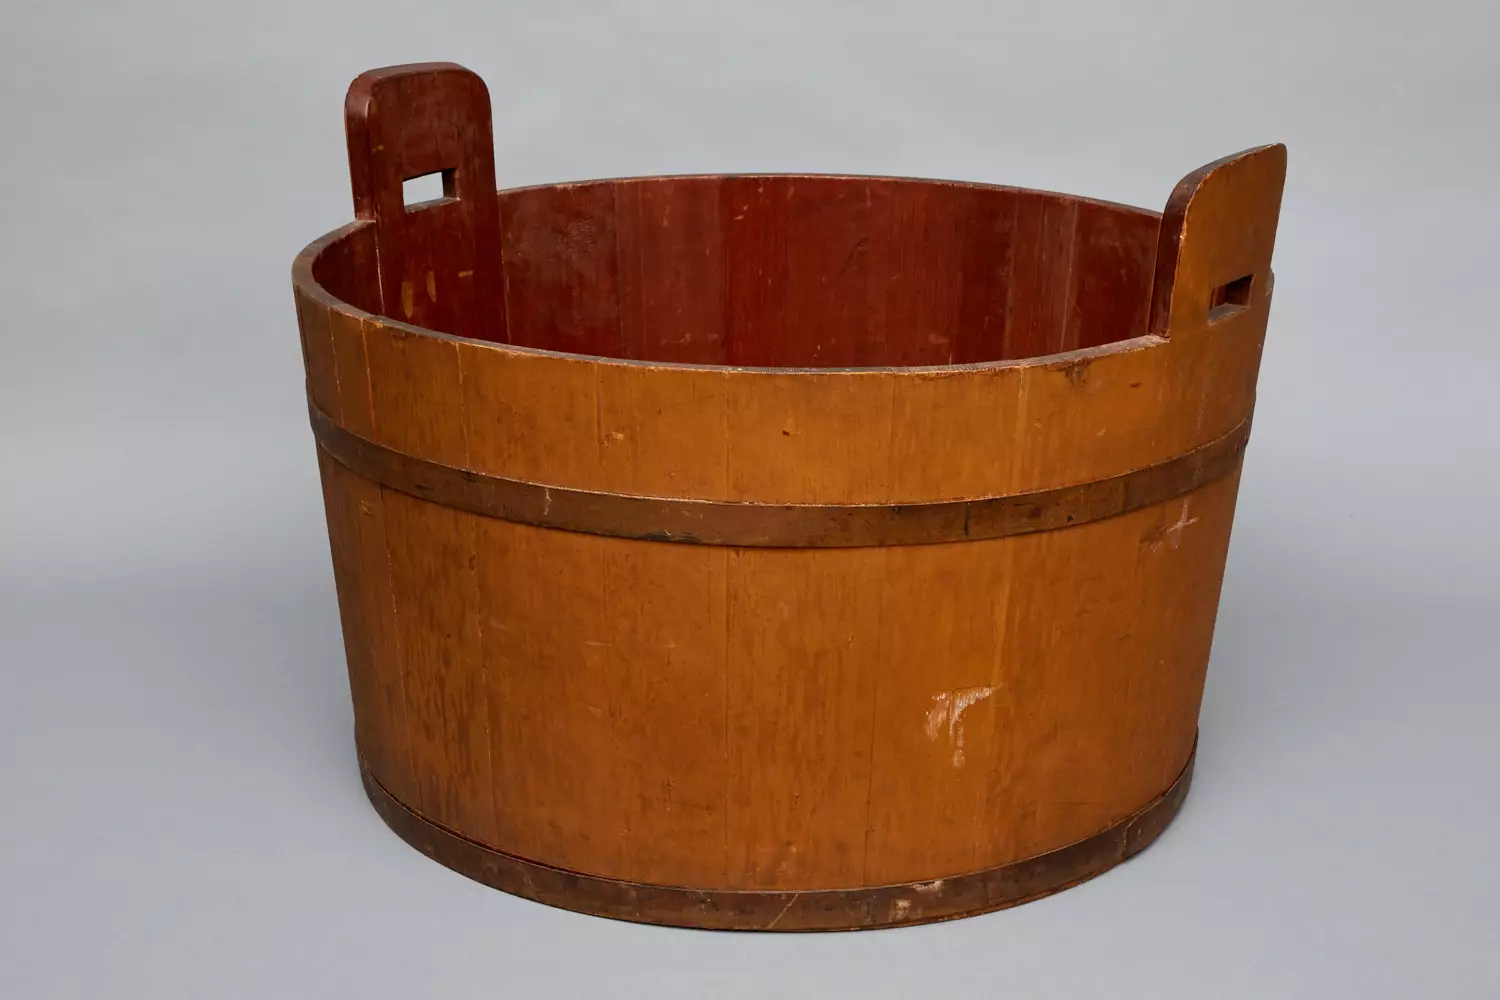 A wooden bucket with handles on a gray background.